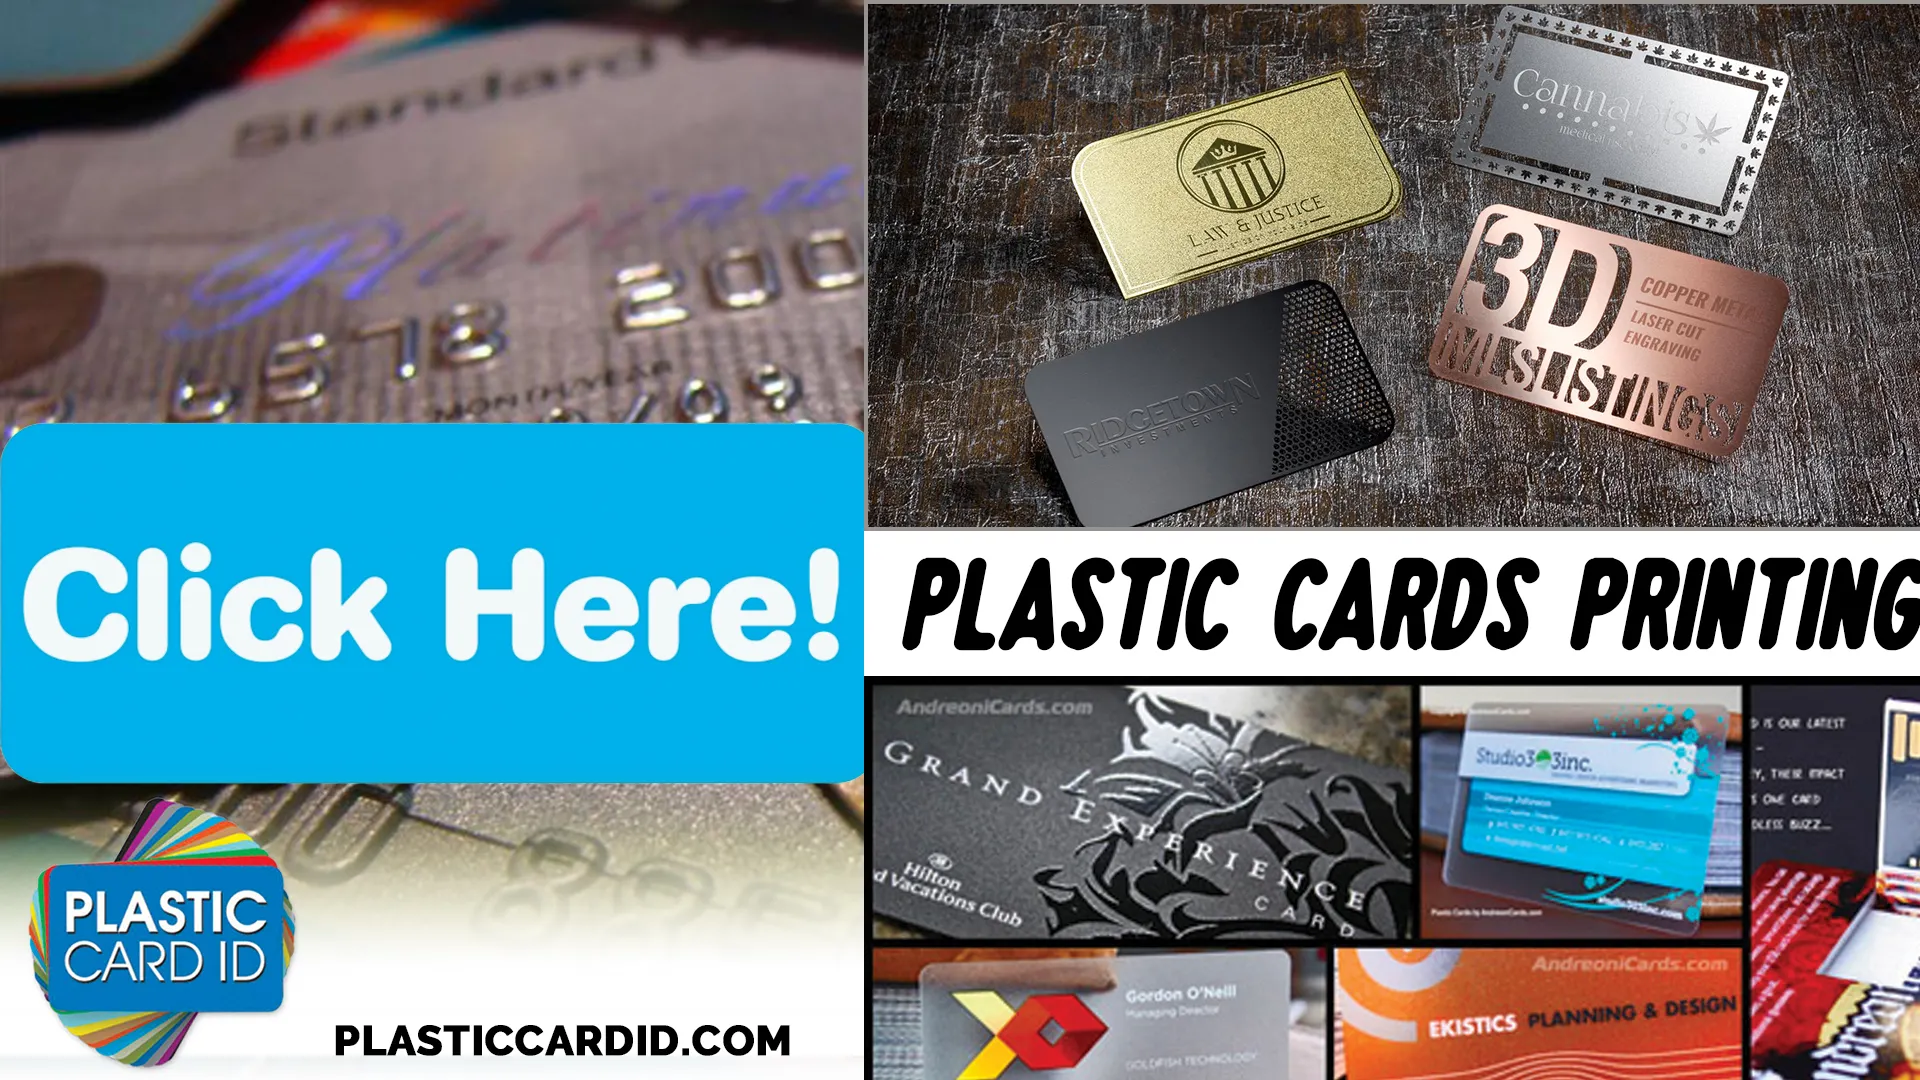 Welcome to the Digital Revolution in Card Solutions